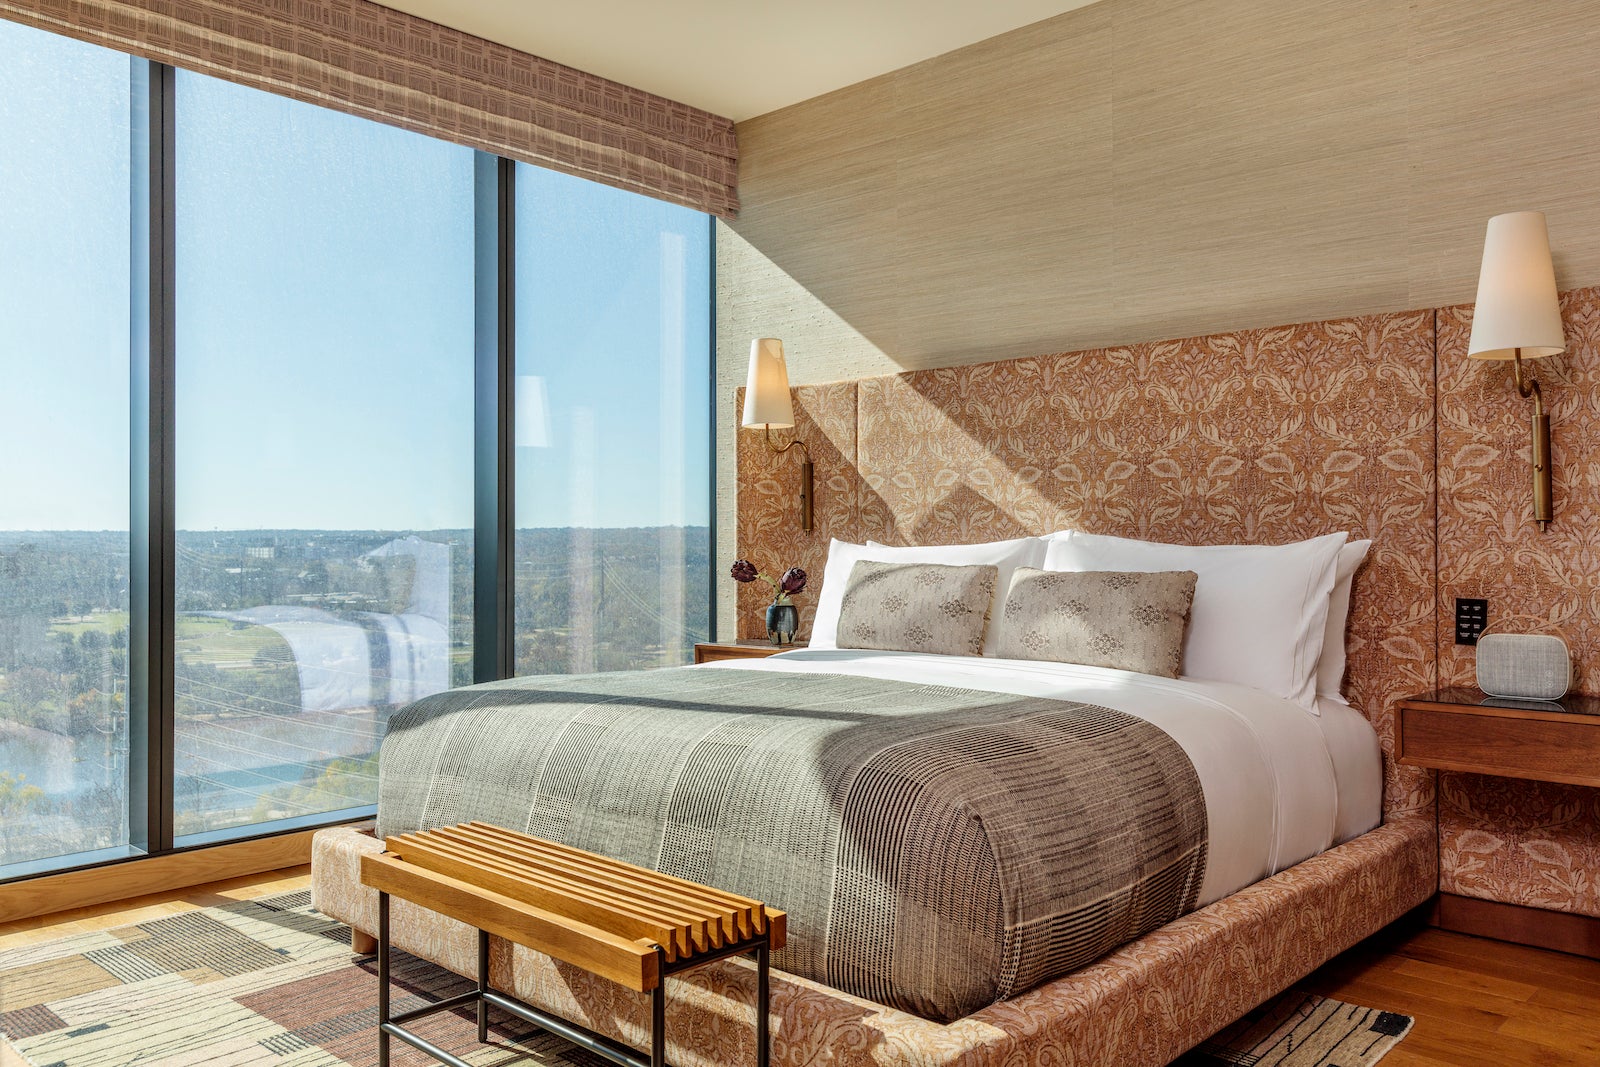 upholstered headboard and floor-to-ceiling windows looking over water